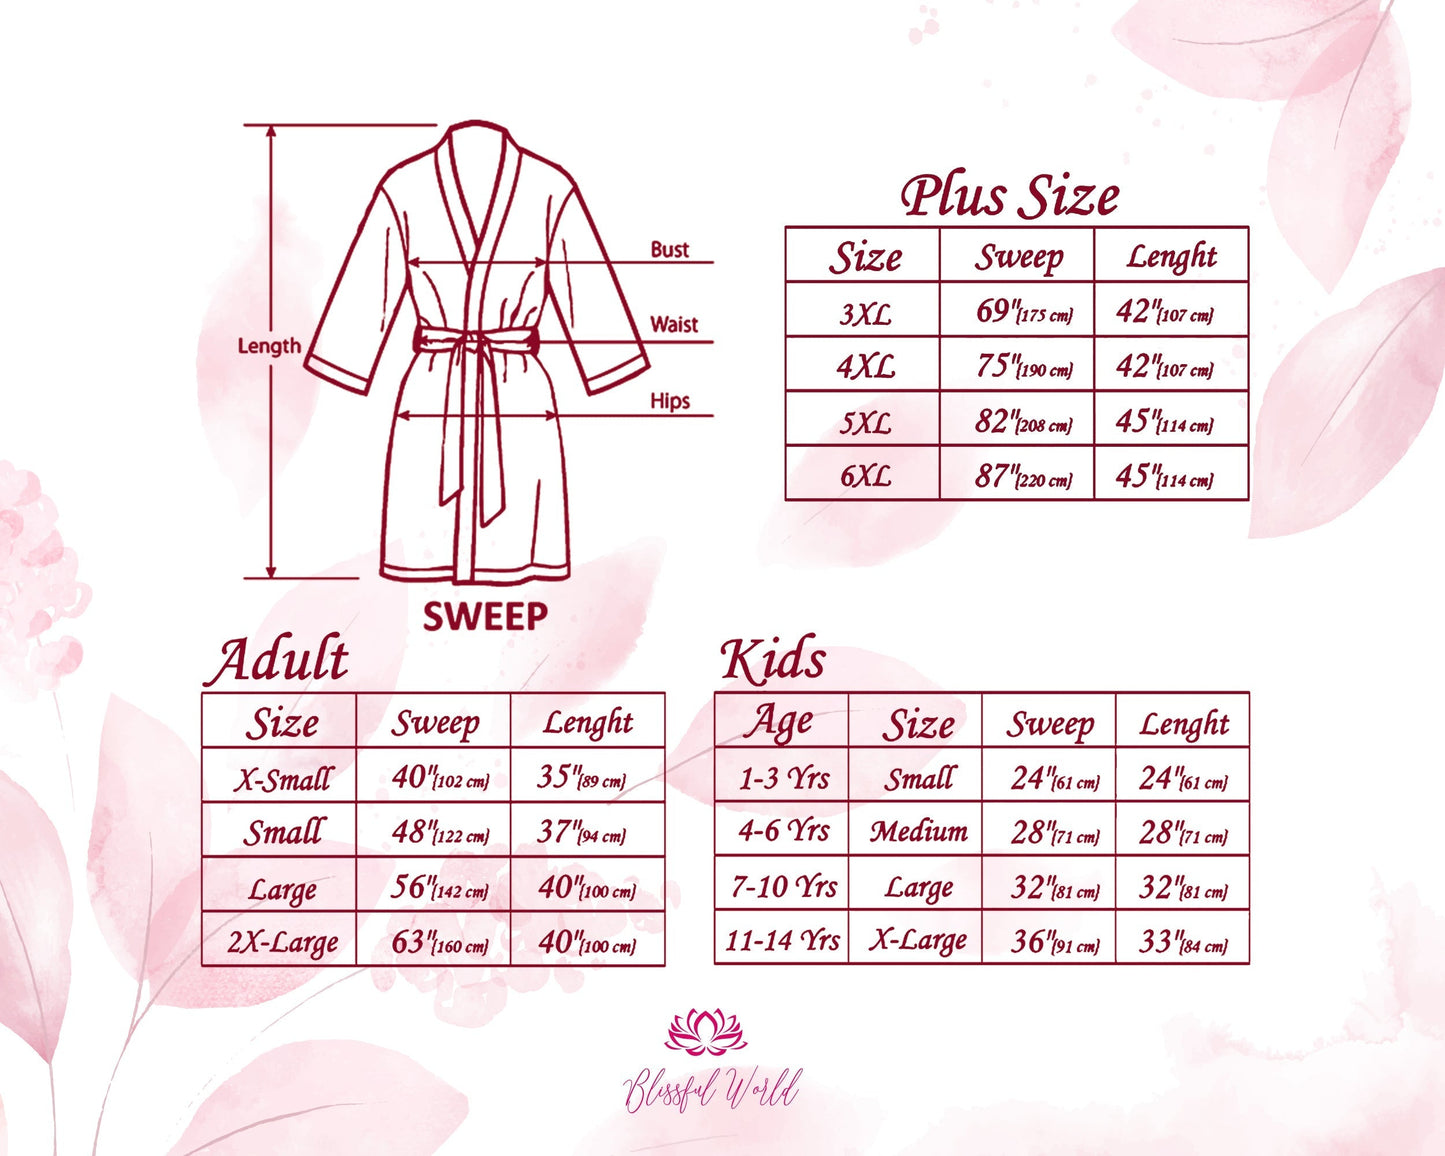 Printed Floral Robes Customized New Rose Print Robes Bridesmaid Robe Personalized Robes Custom Robes Bridal Robe Kimono Robes Satin Robe gift for her Robes getting ready robes